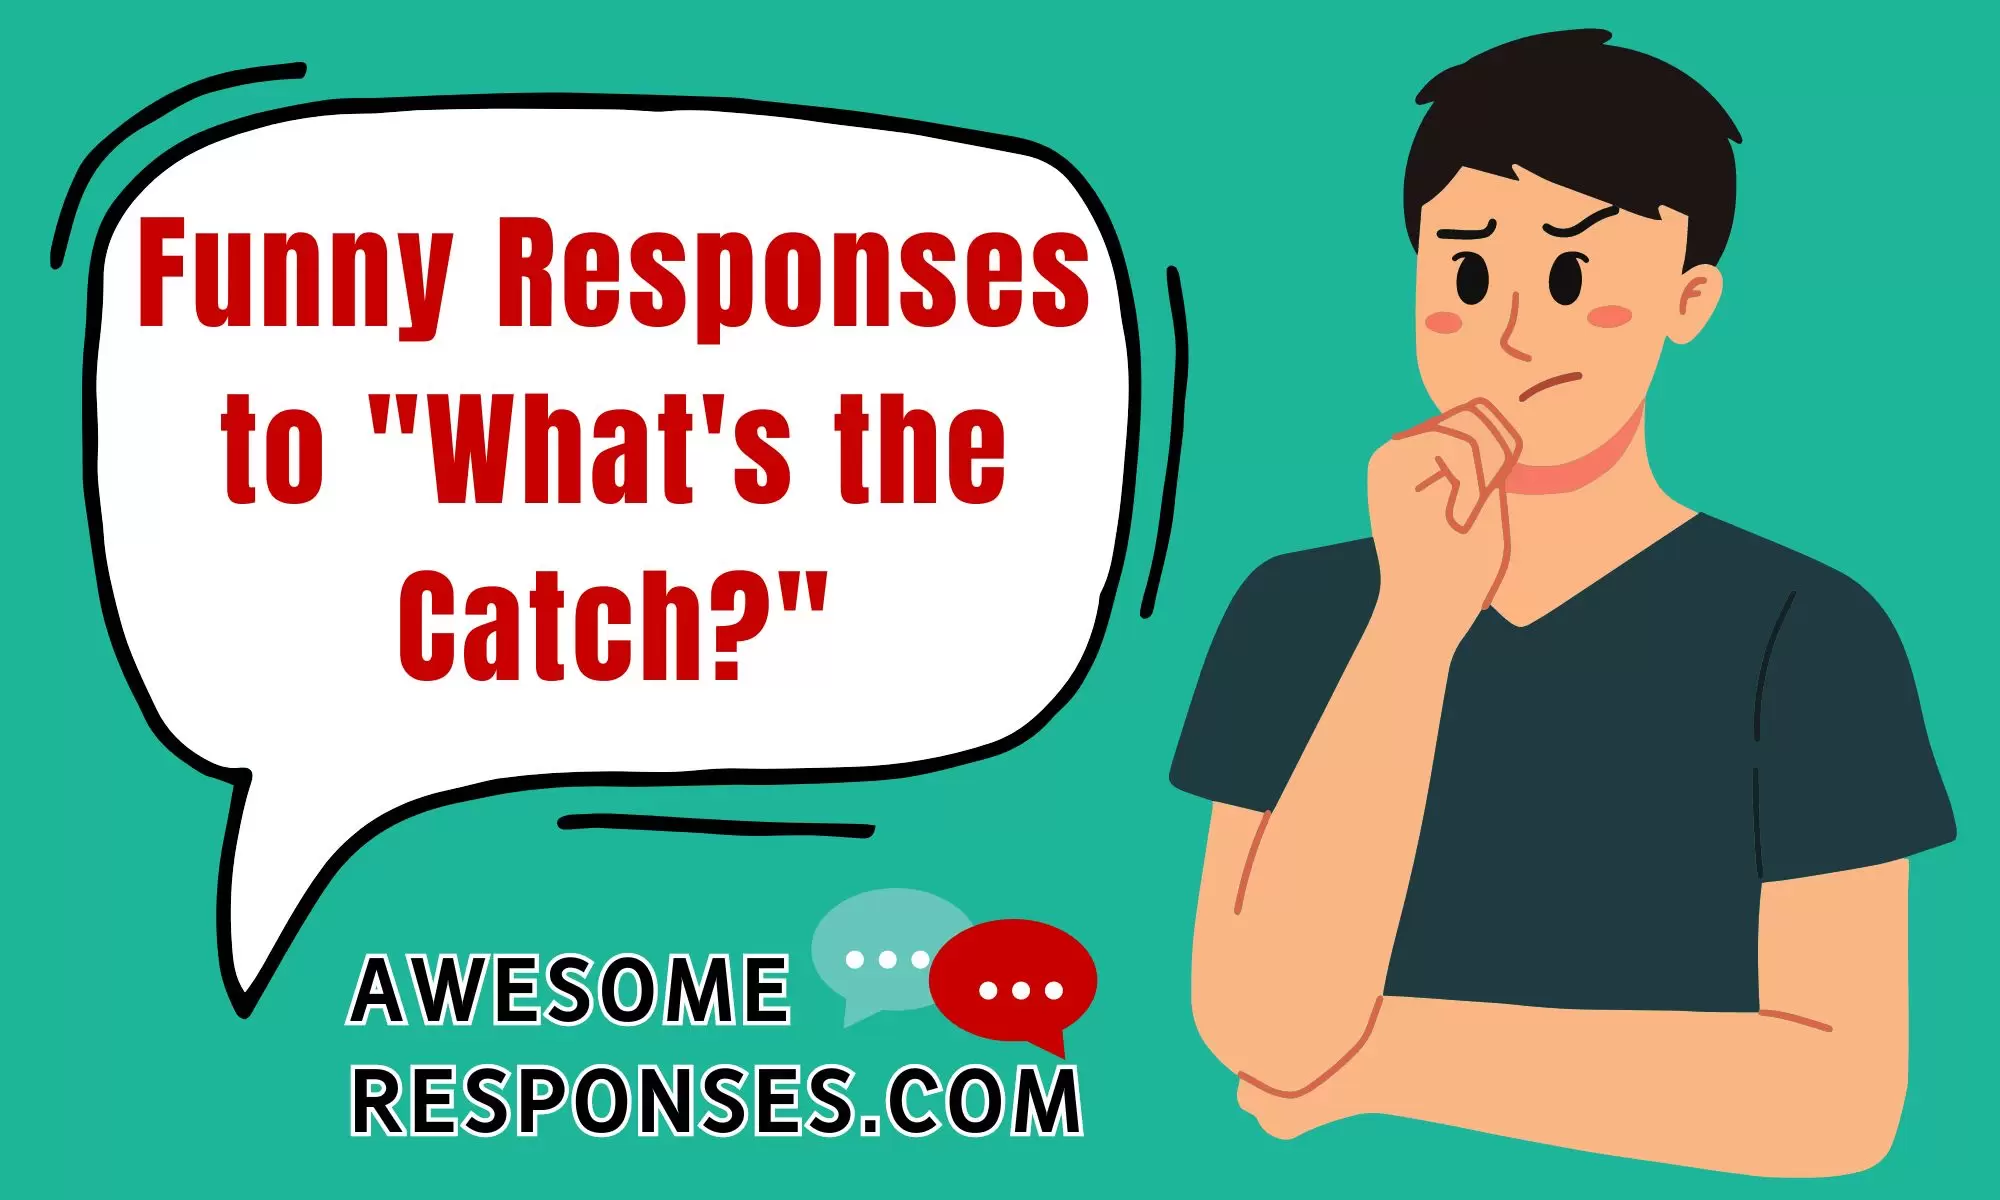 Funny Responses to "What's the Catch?"